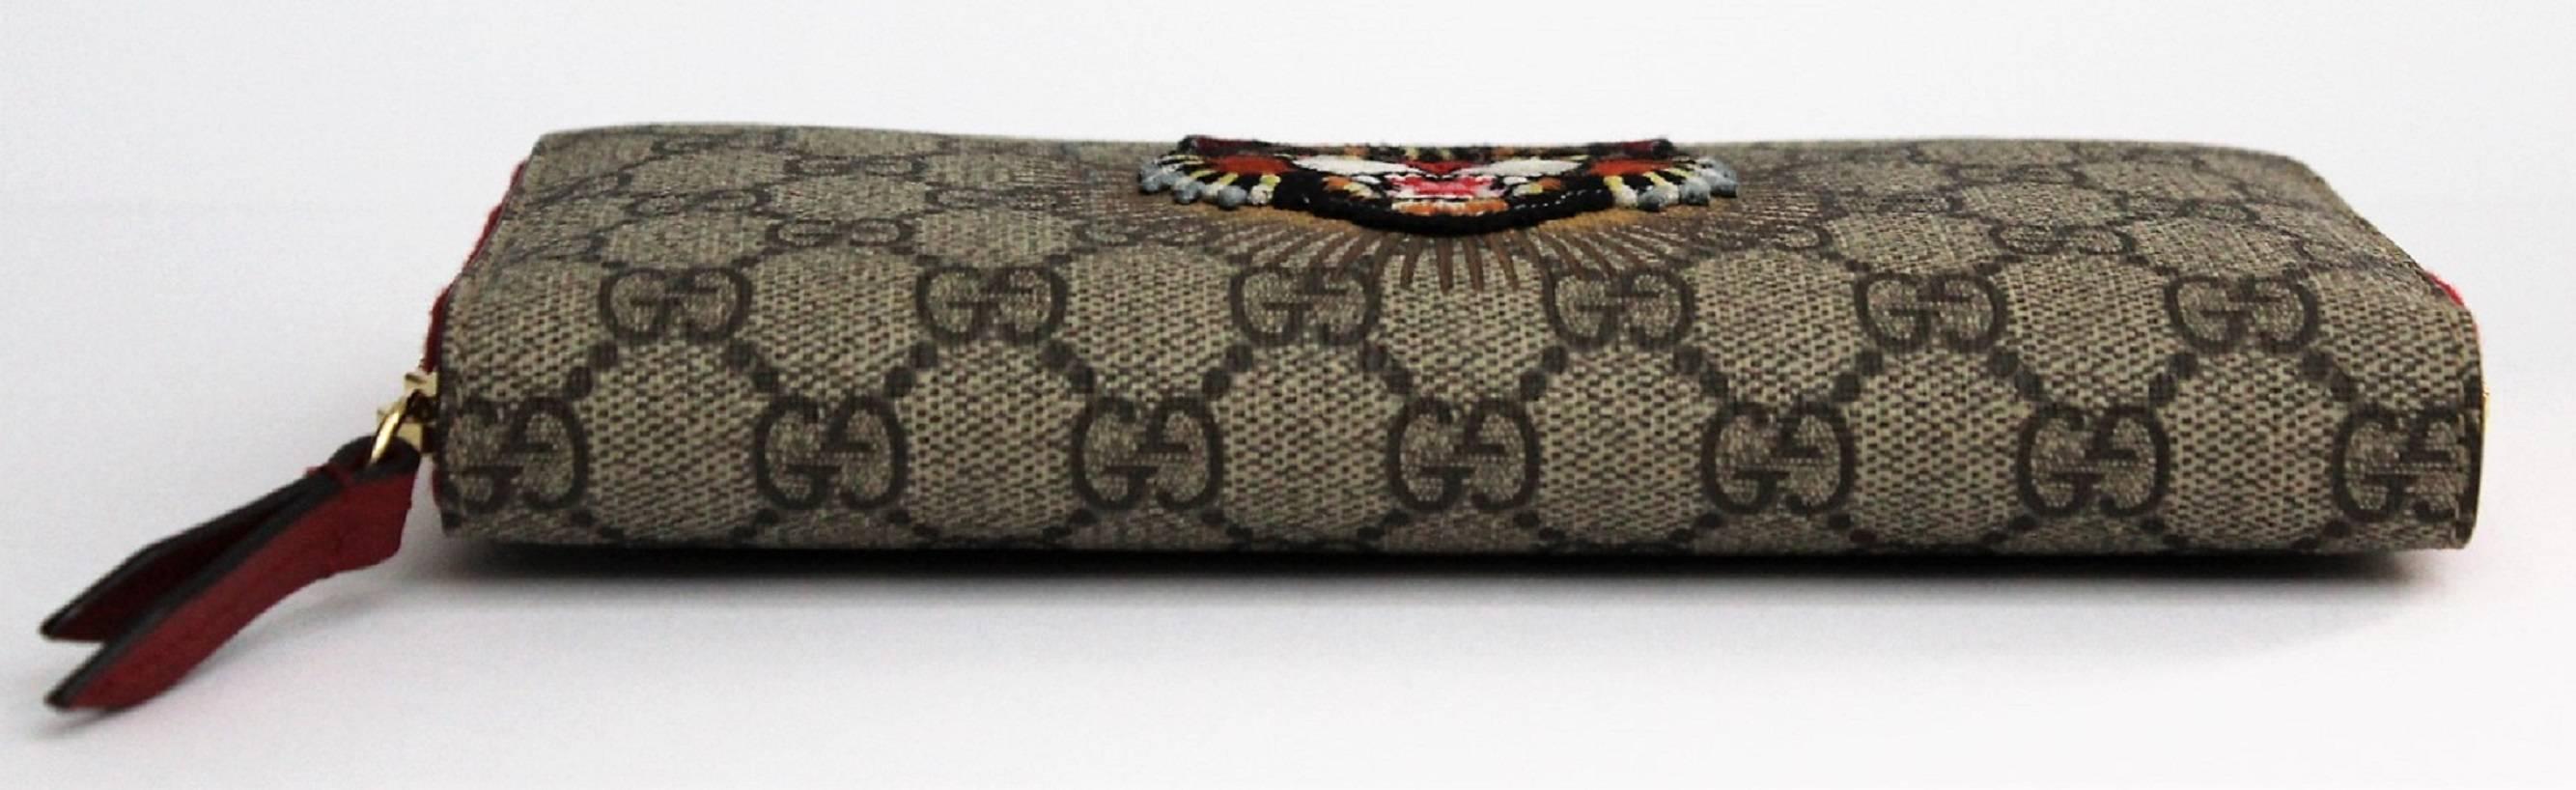 Women's or Men's Gucci Wallet Angry Cat GG Supreme